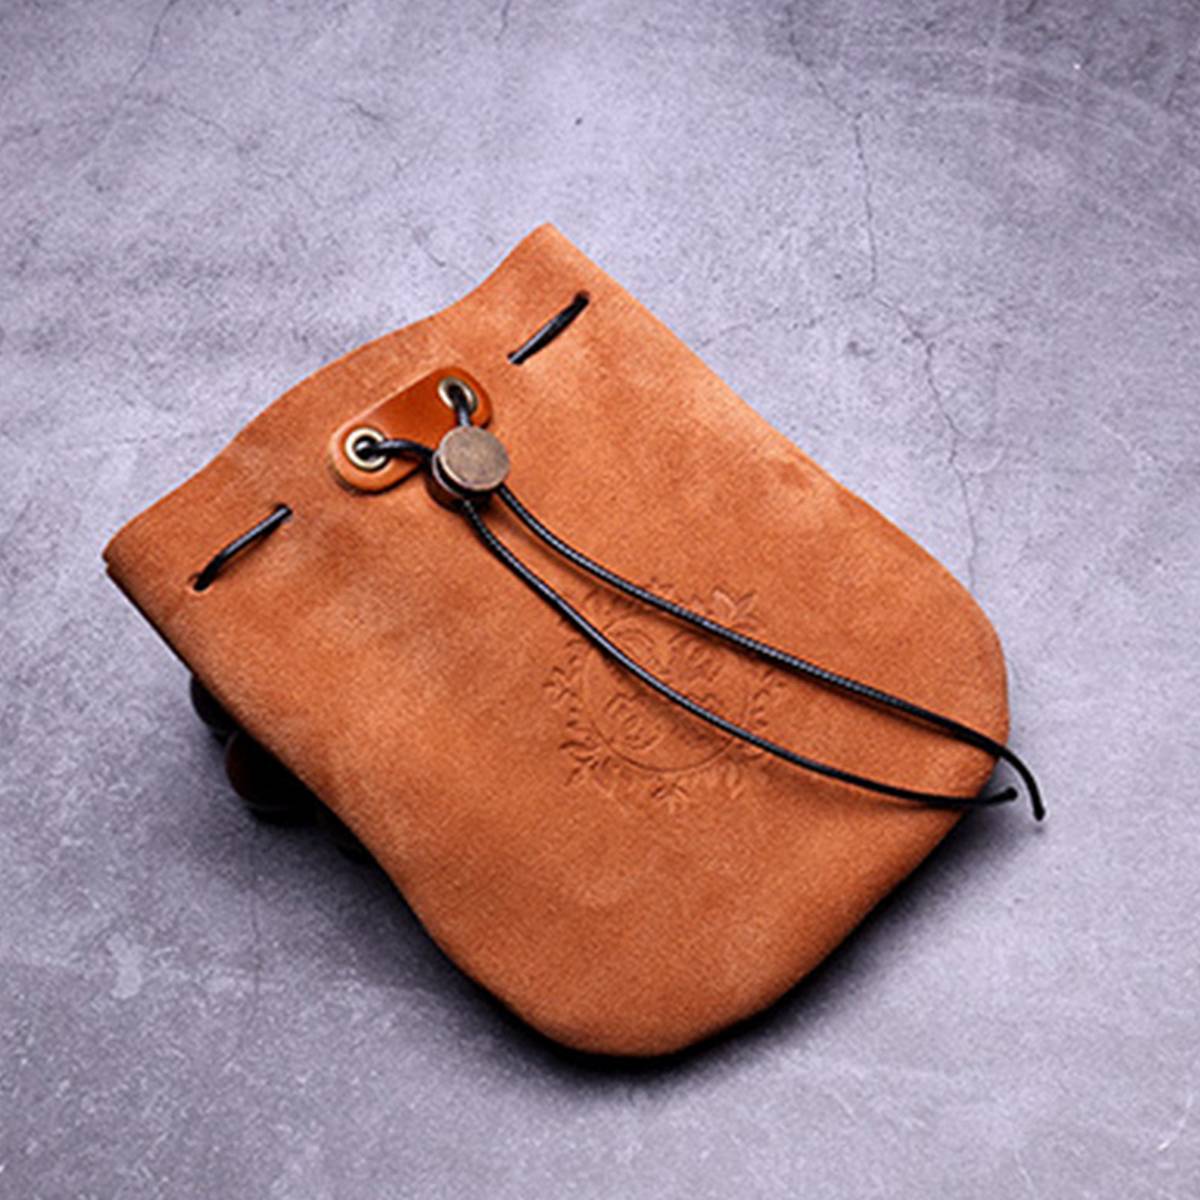 Leather Drawstring Pouch Coin Bag Purse - Medicine Tobacco Holder